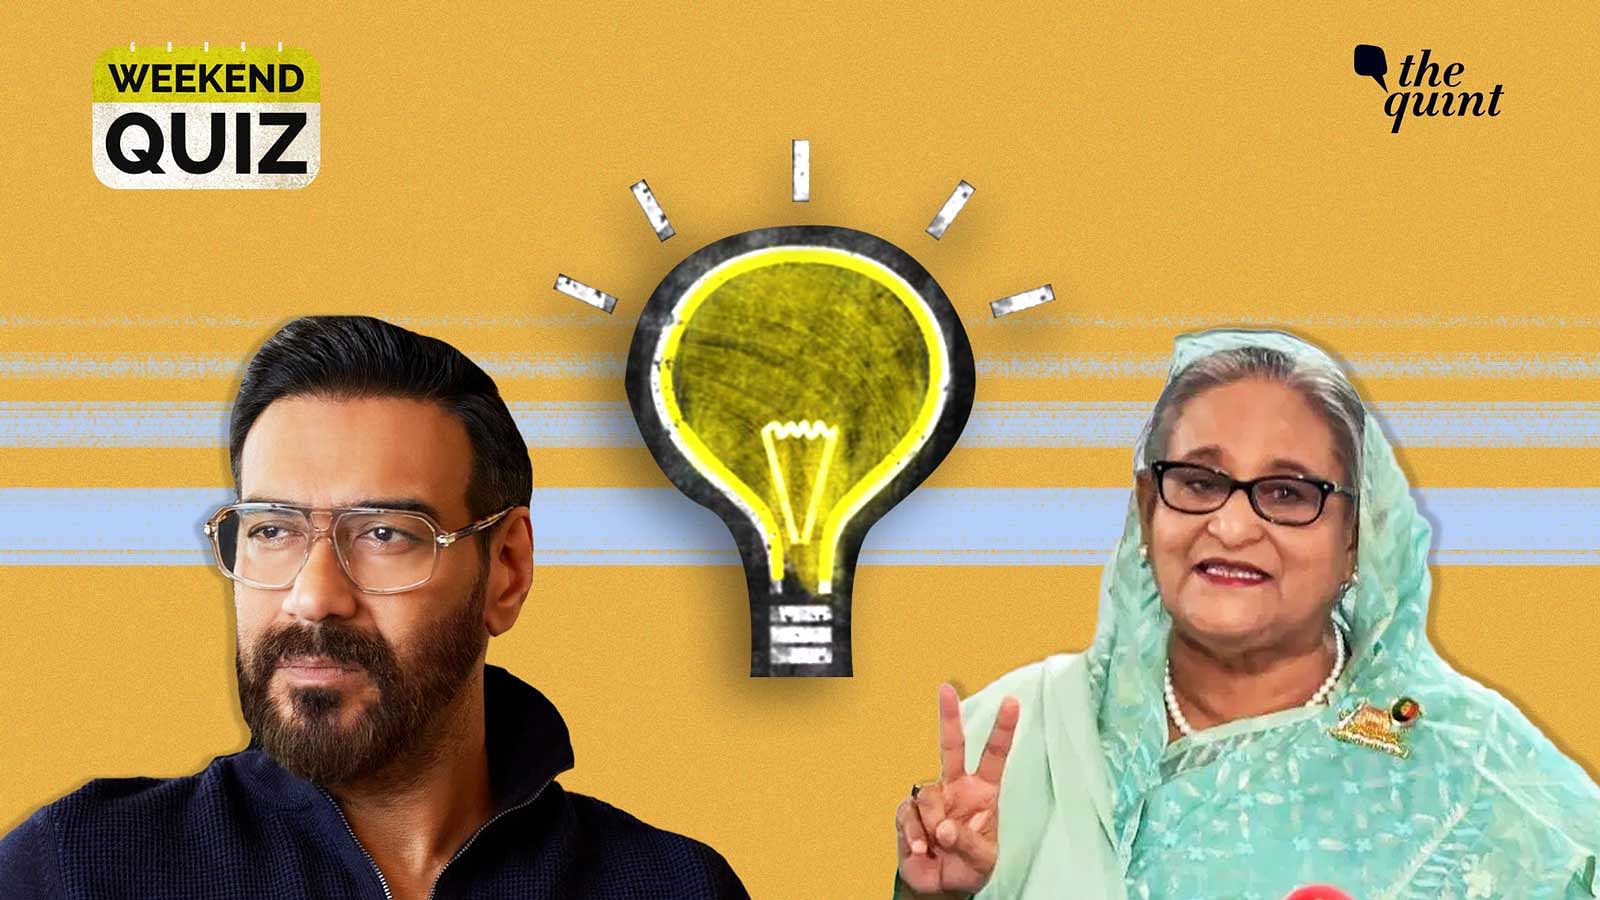 <div class="paragraphs"><p>From Bangladesh elections to the Golden Globes, have you been tracking the news this week? Take <strong>The Quint</strong>'s Weekend Quiz To Find Out How Up-to-Date You Are!</p></div>